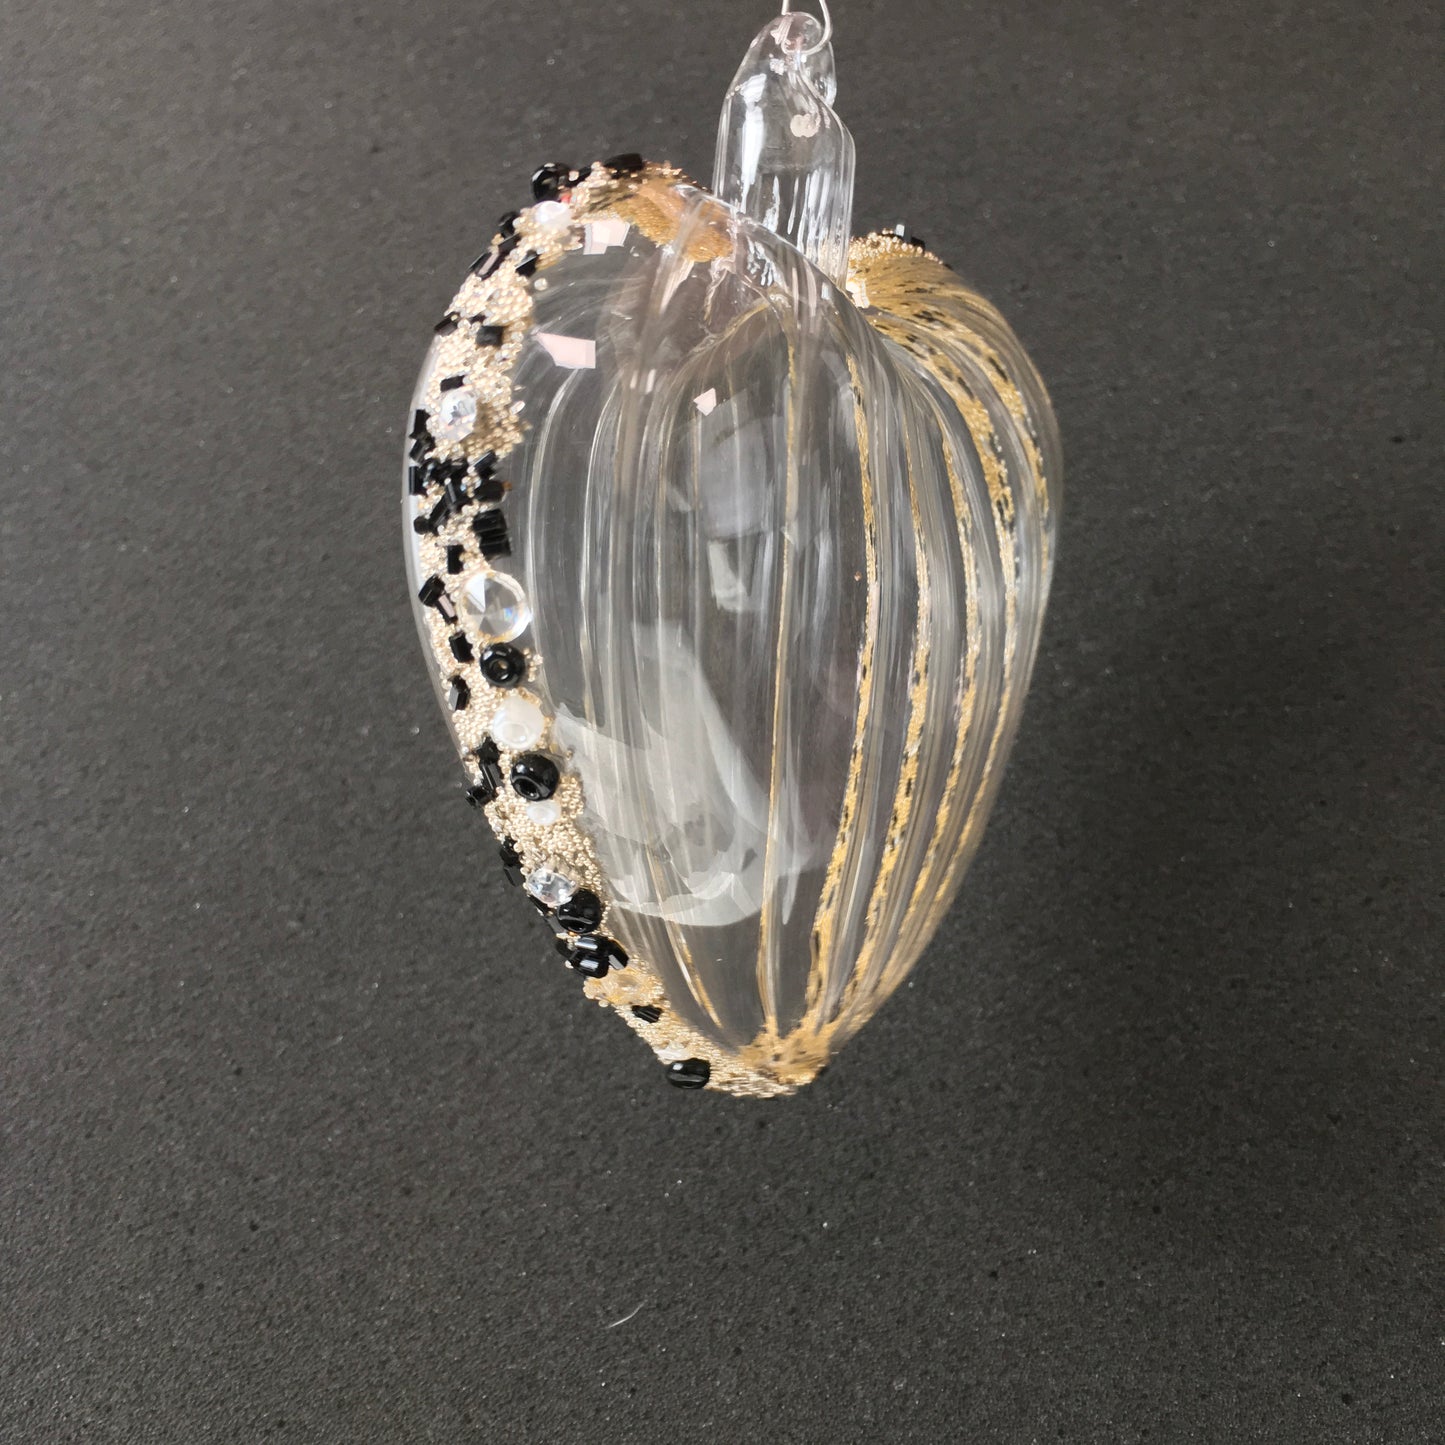 Hand-blown glass heart decorations with black beads for Christmas, Valentines Day and love themed decorating